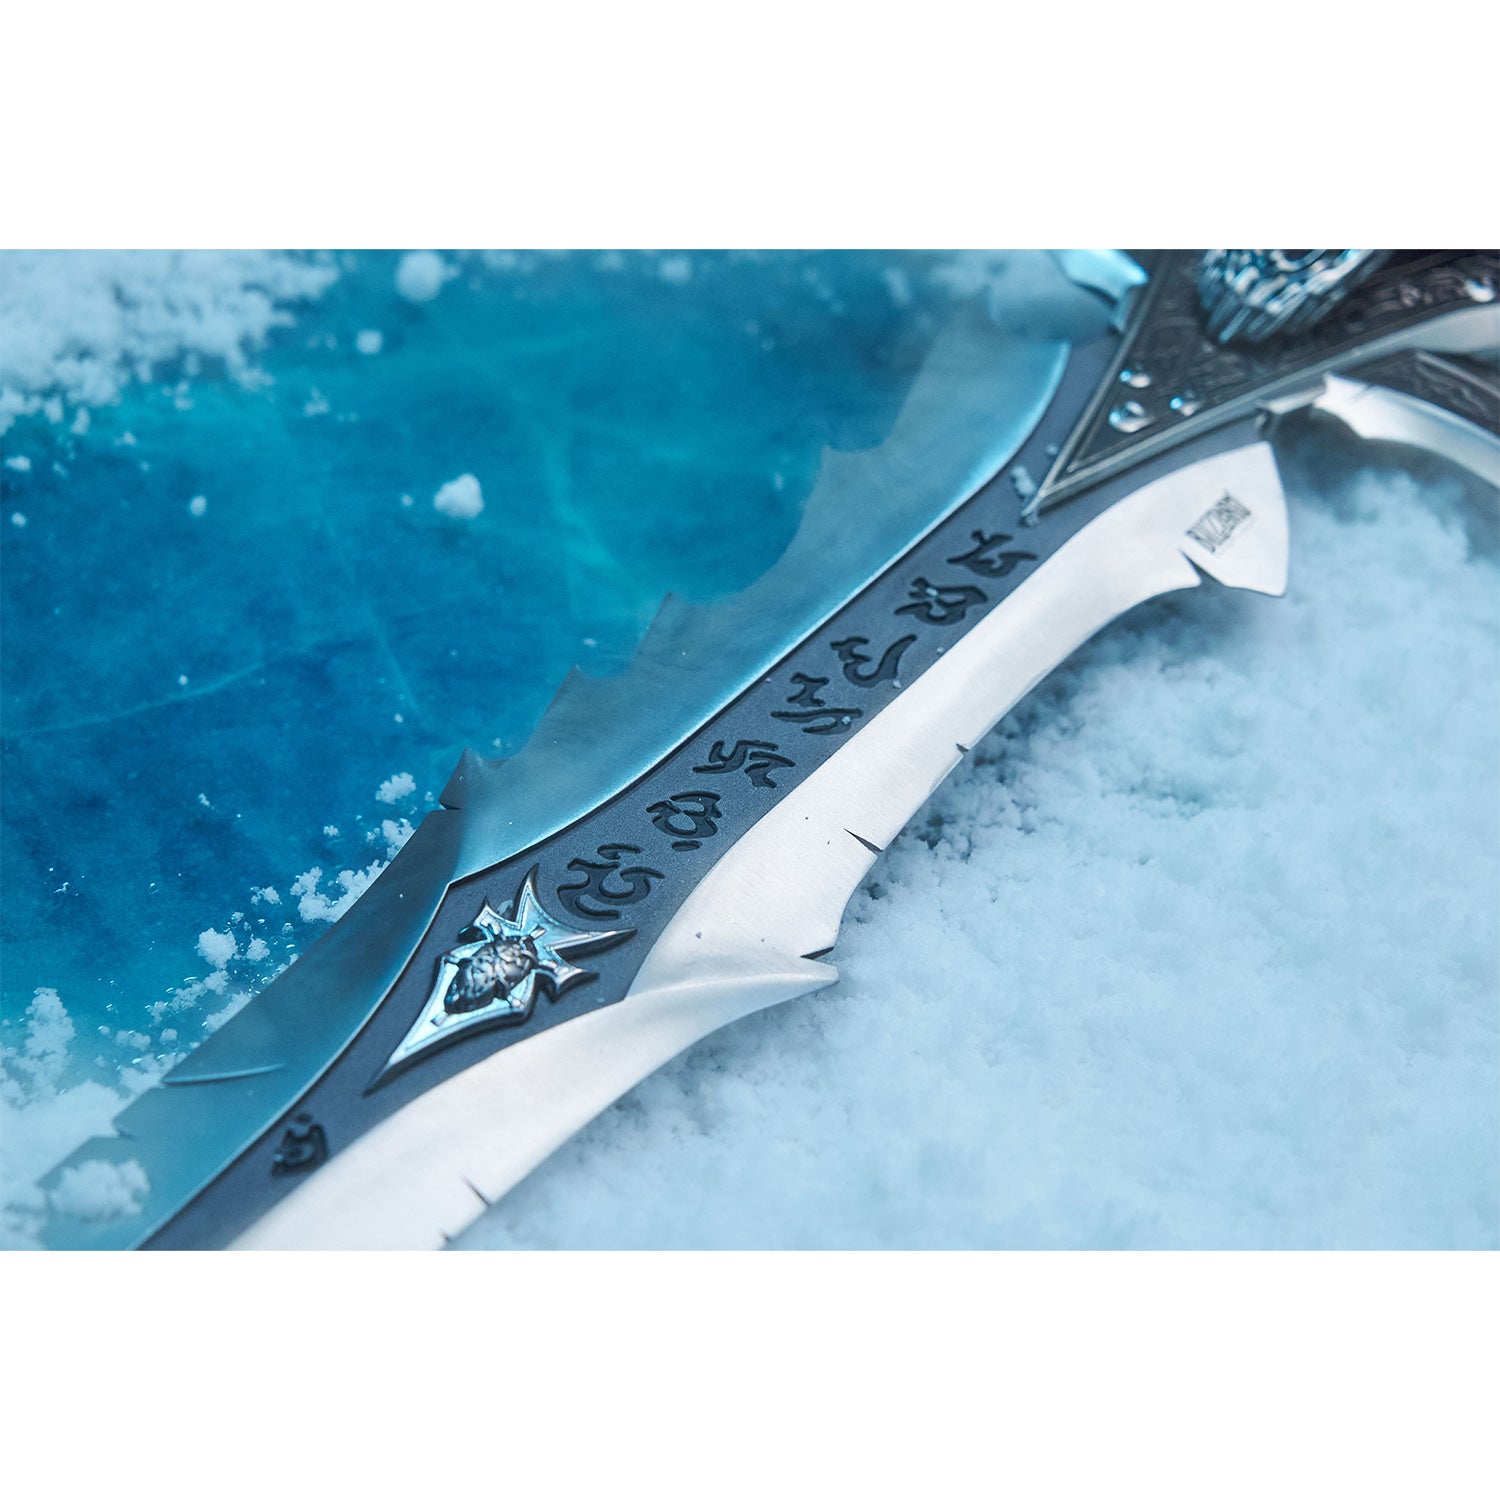 World of Warcraft Frostmourne Premium Replica - Close Up View of Sword Blade